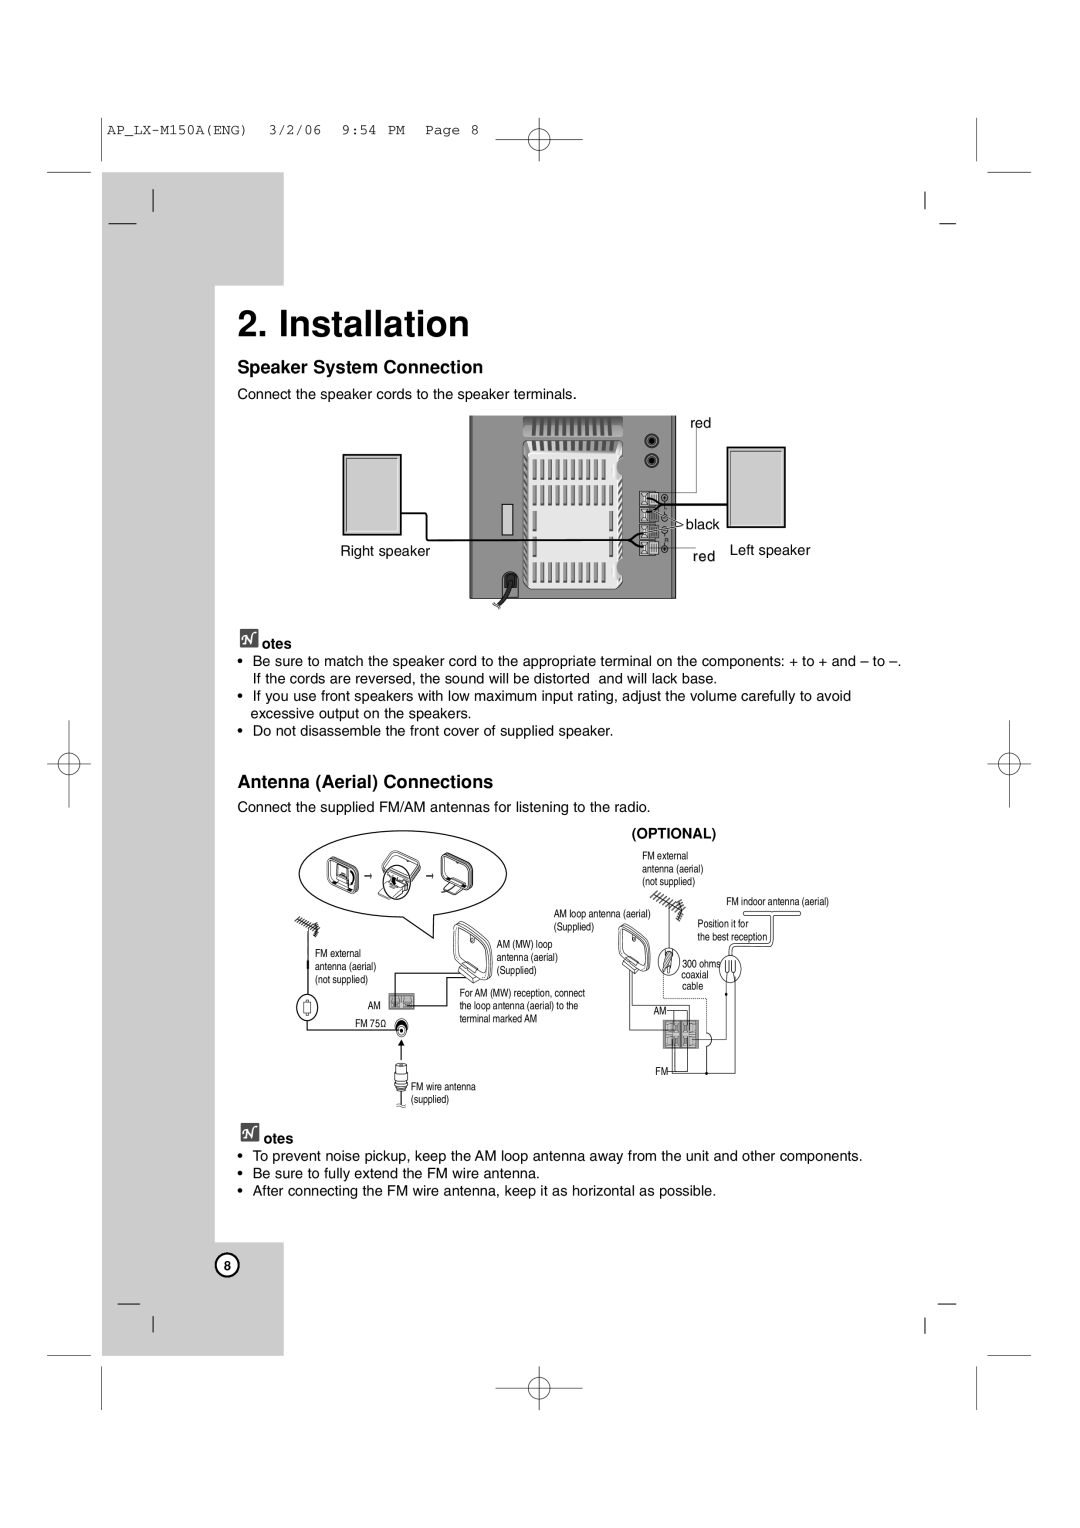 LG Electronics LX-M150 owner manual Installation, Speaker System Connection, Antenna Aerial Connections, otes, Optional 